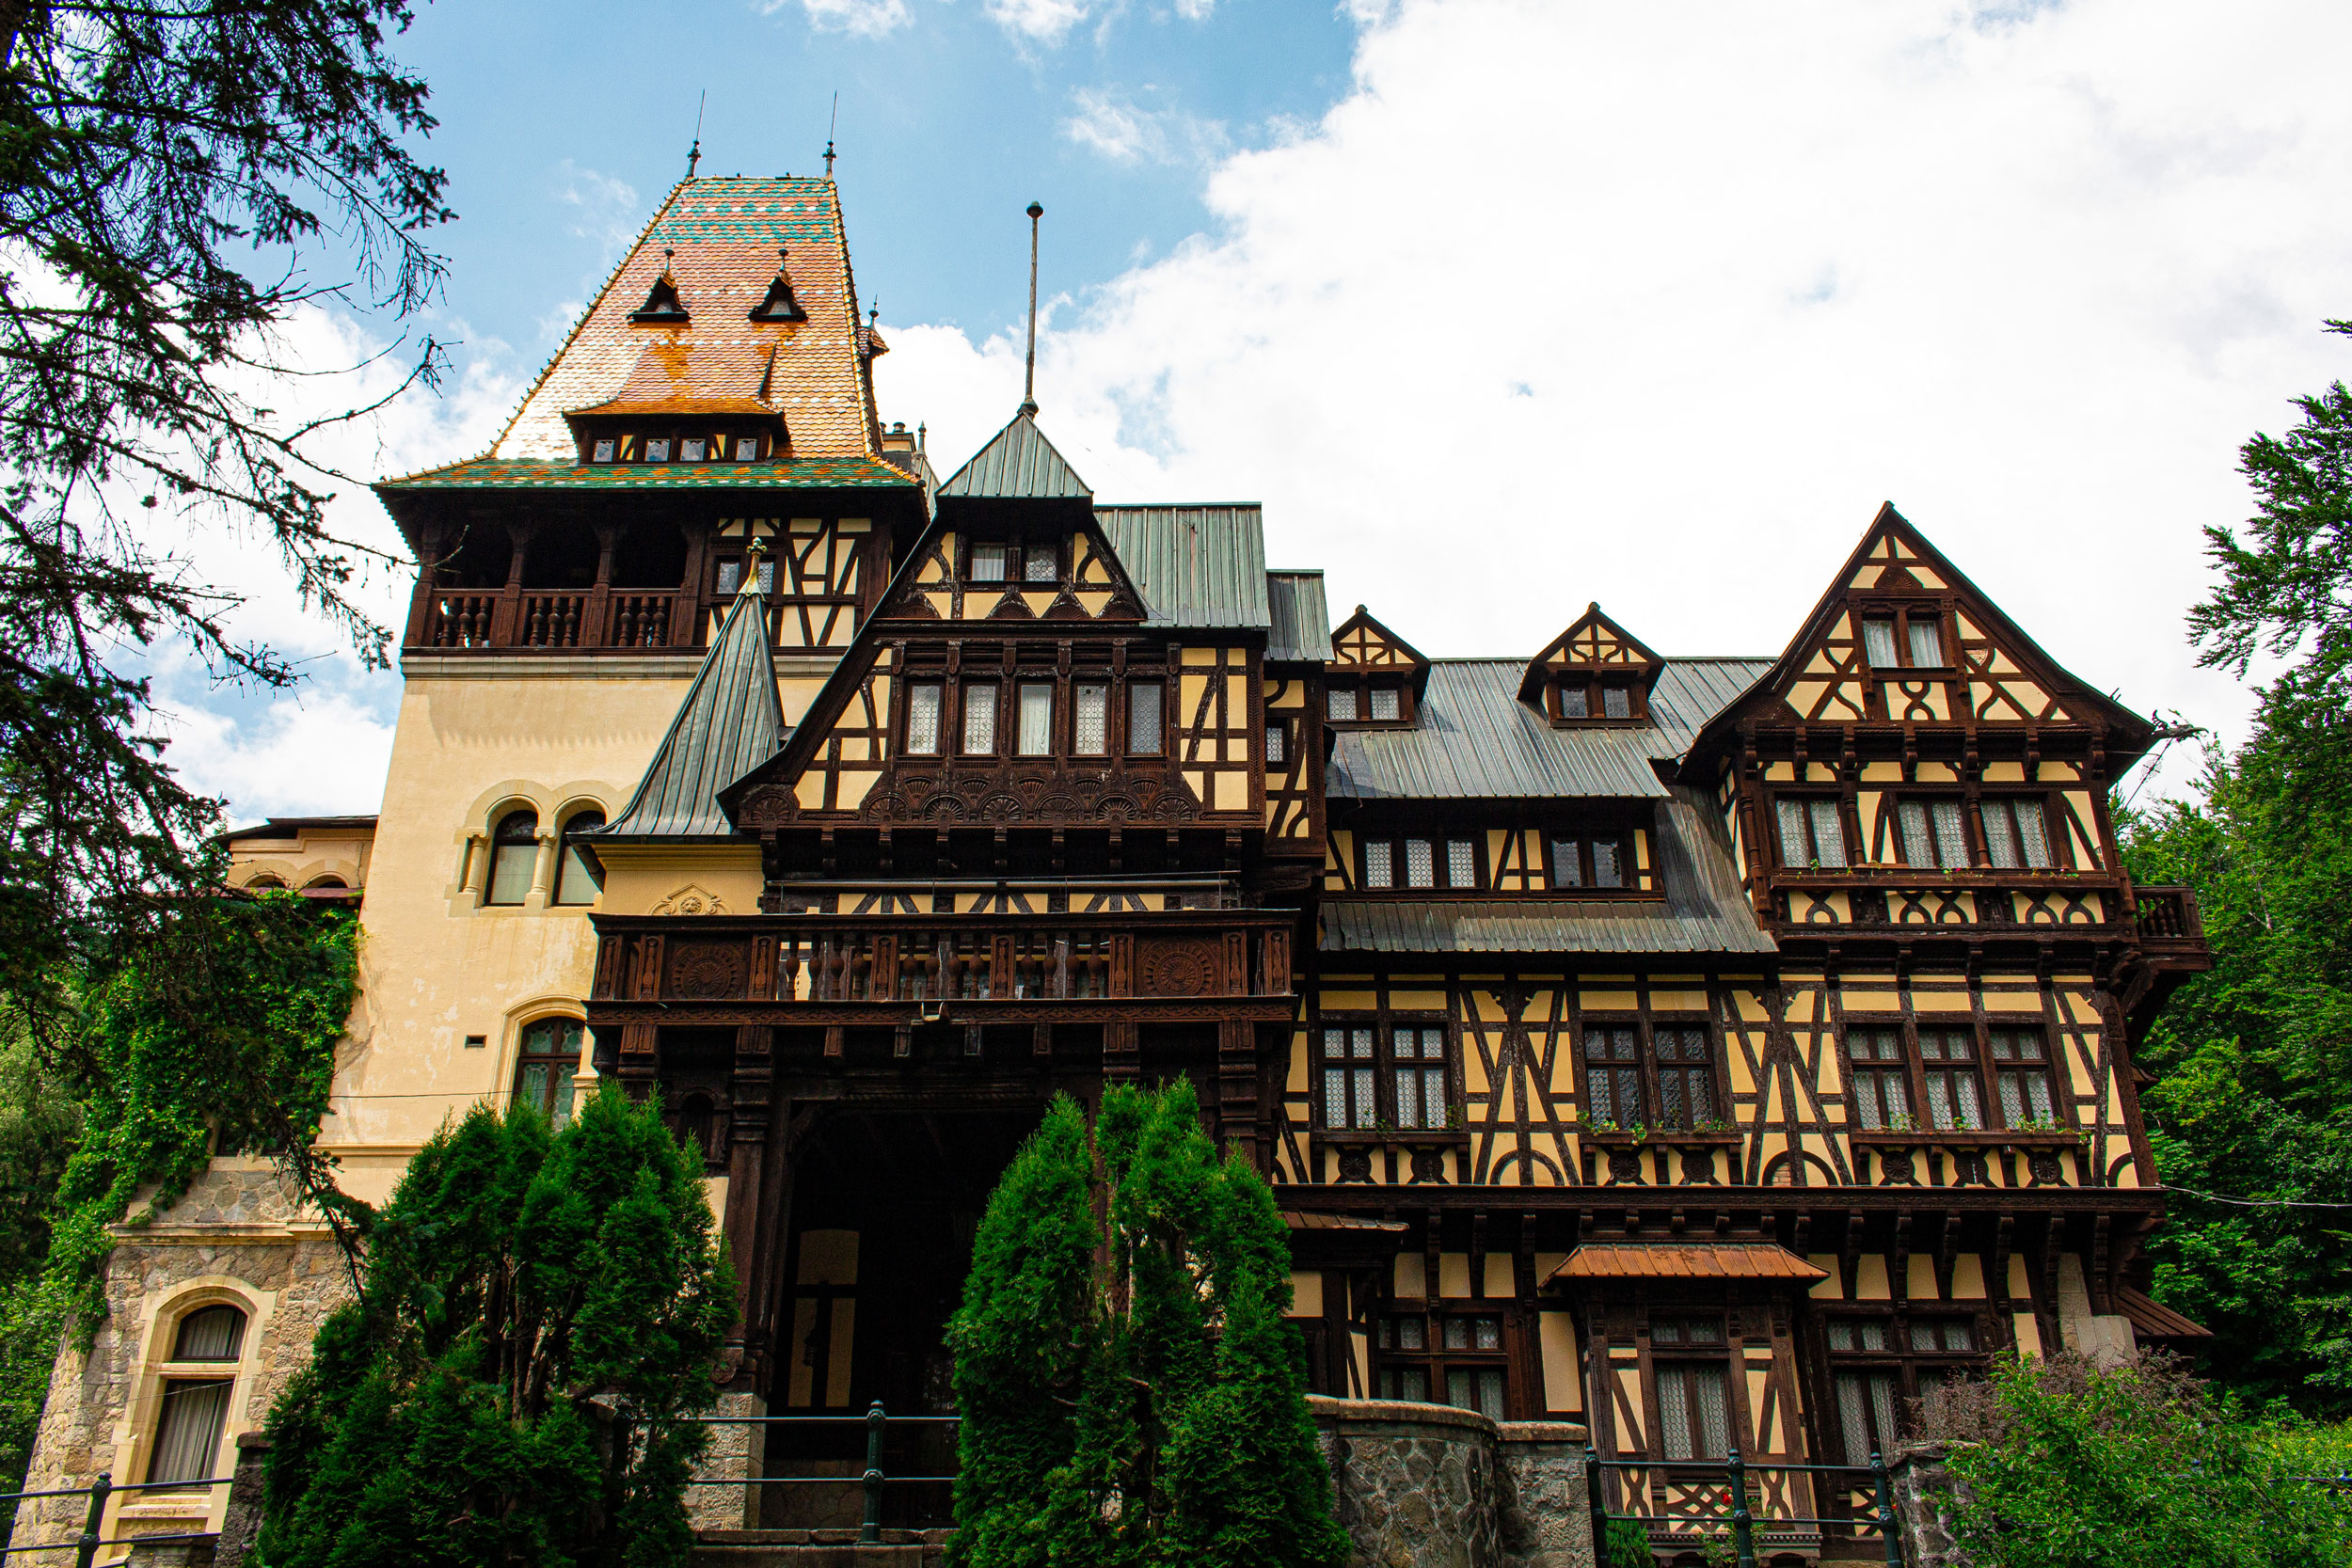 The front of Pelisor Palace in Romania